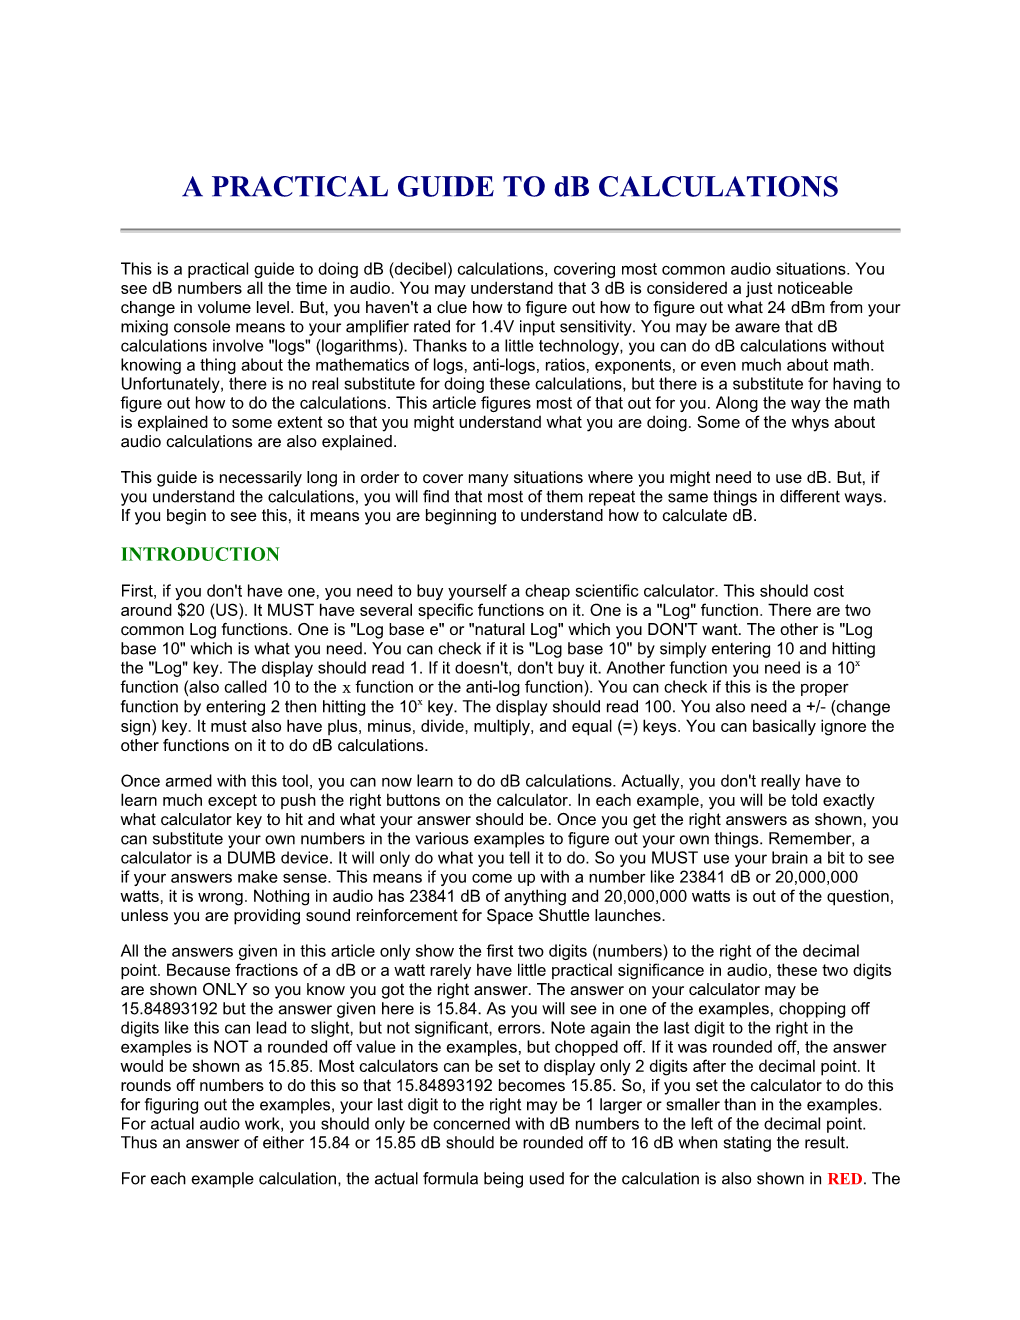 A PRACTICAL GUIDE to Db CALCULATIONS